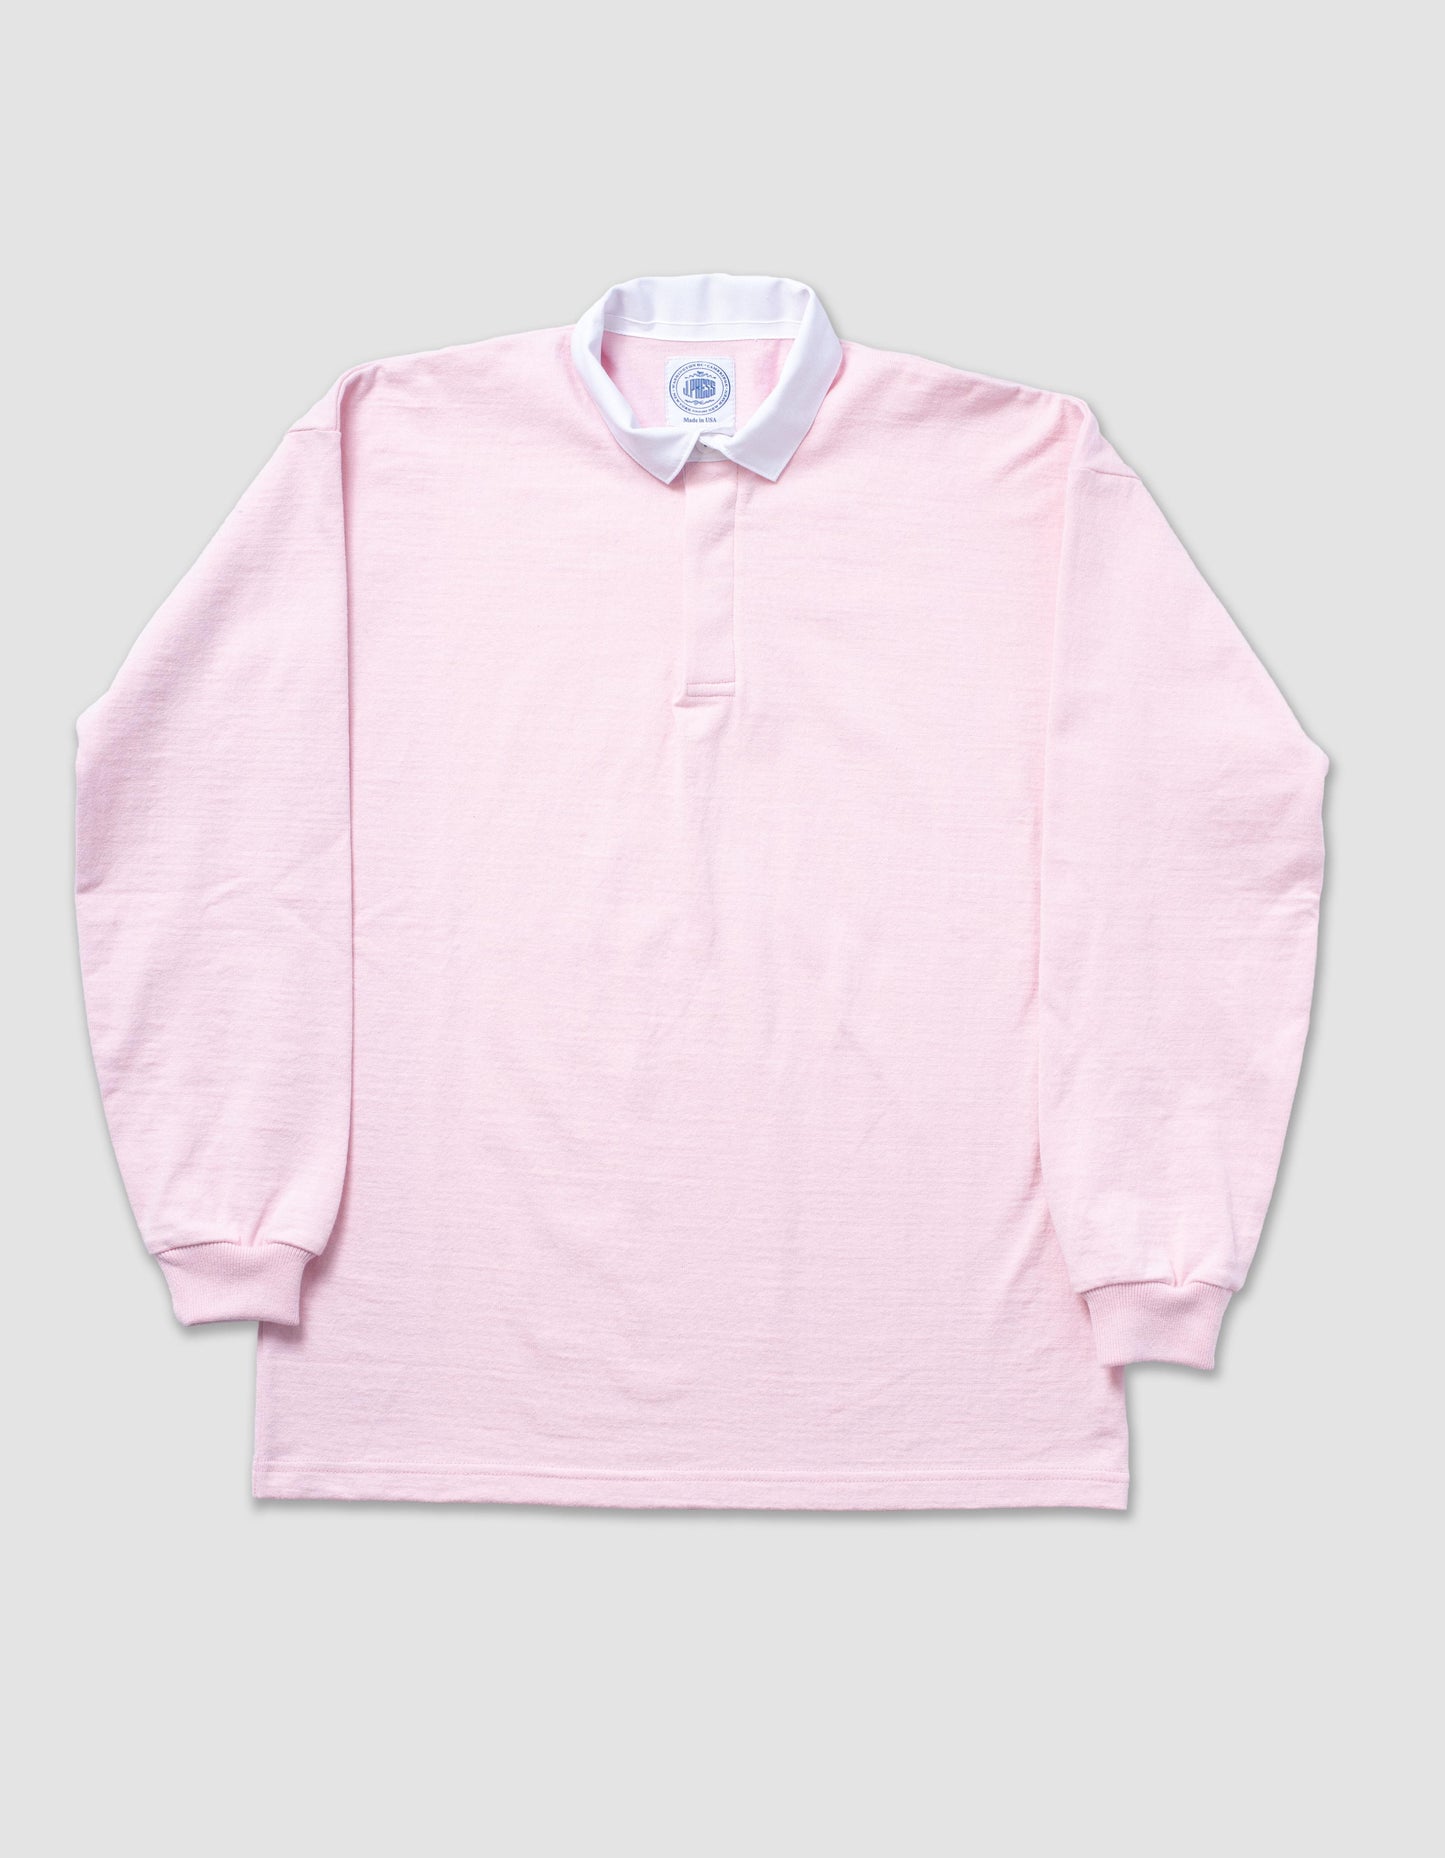 SOLID RUGBY - PINK